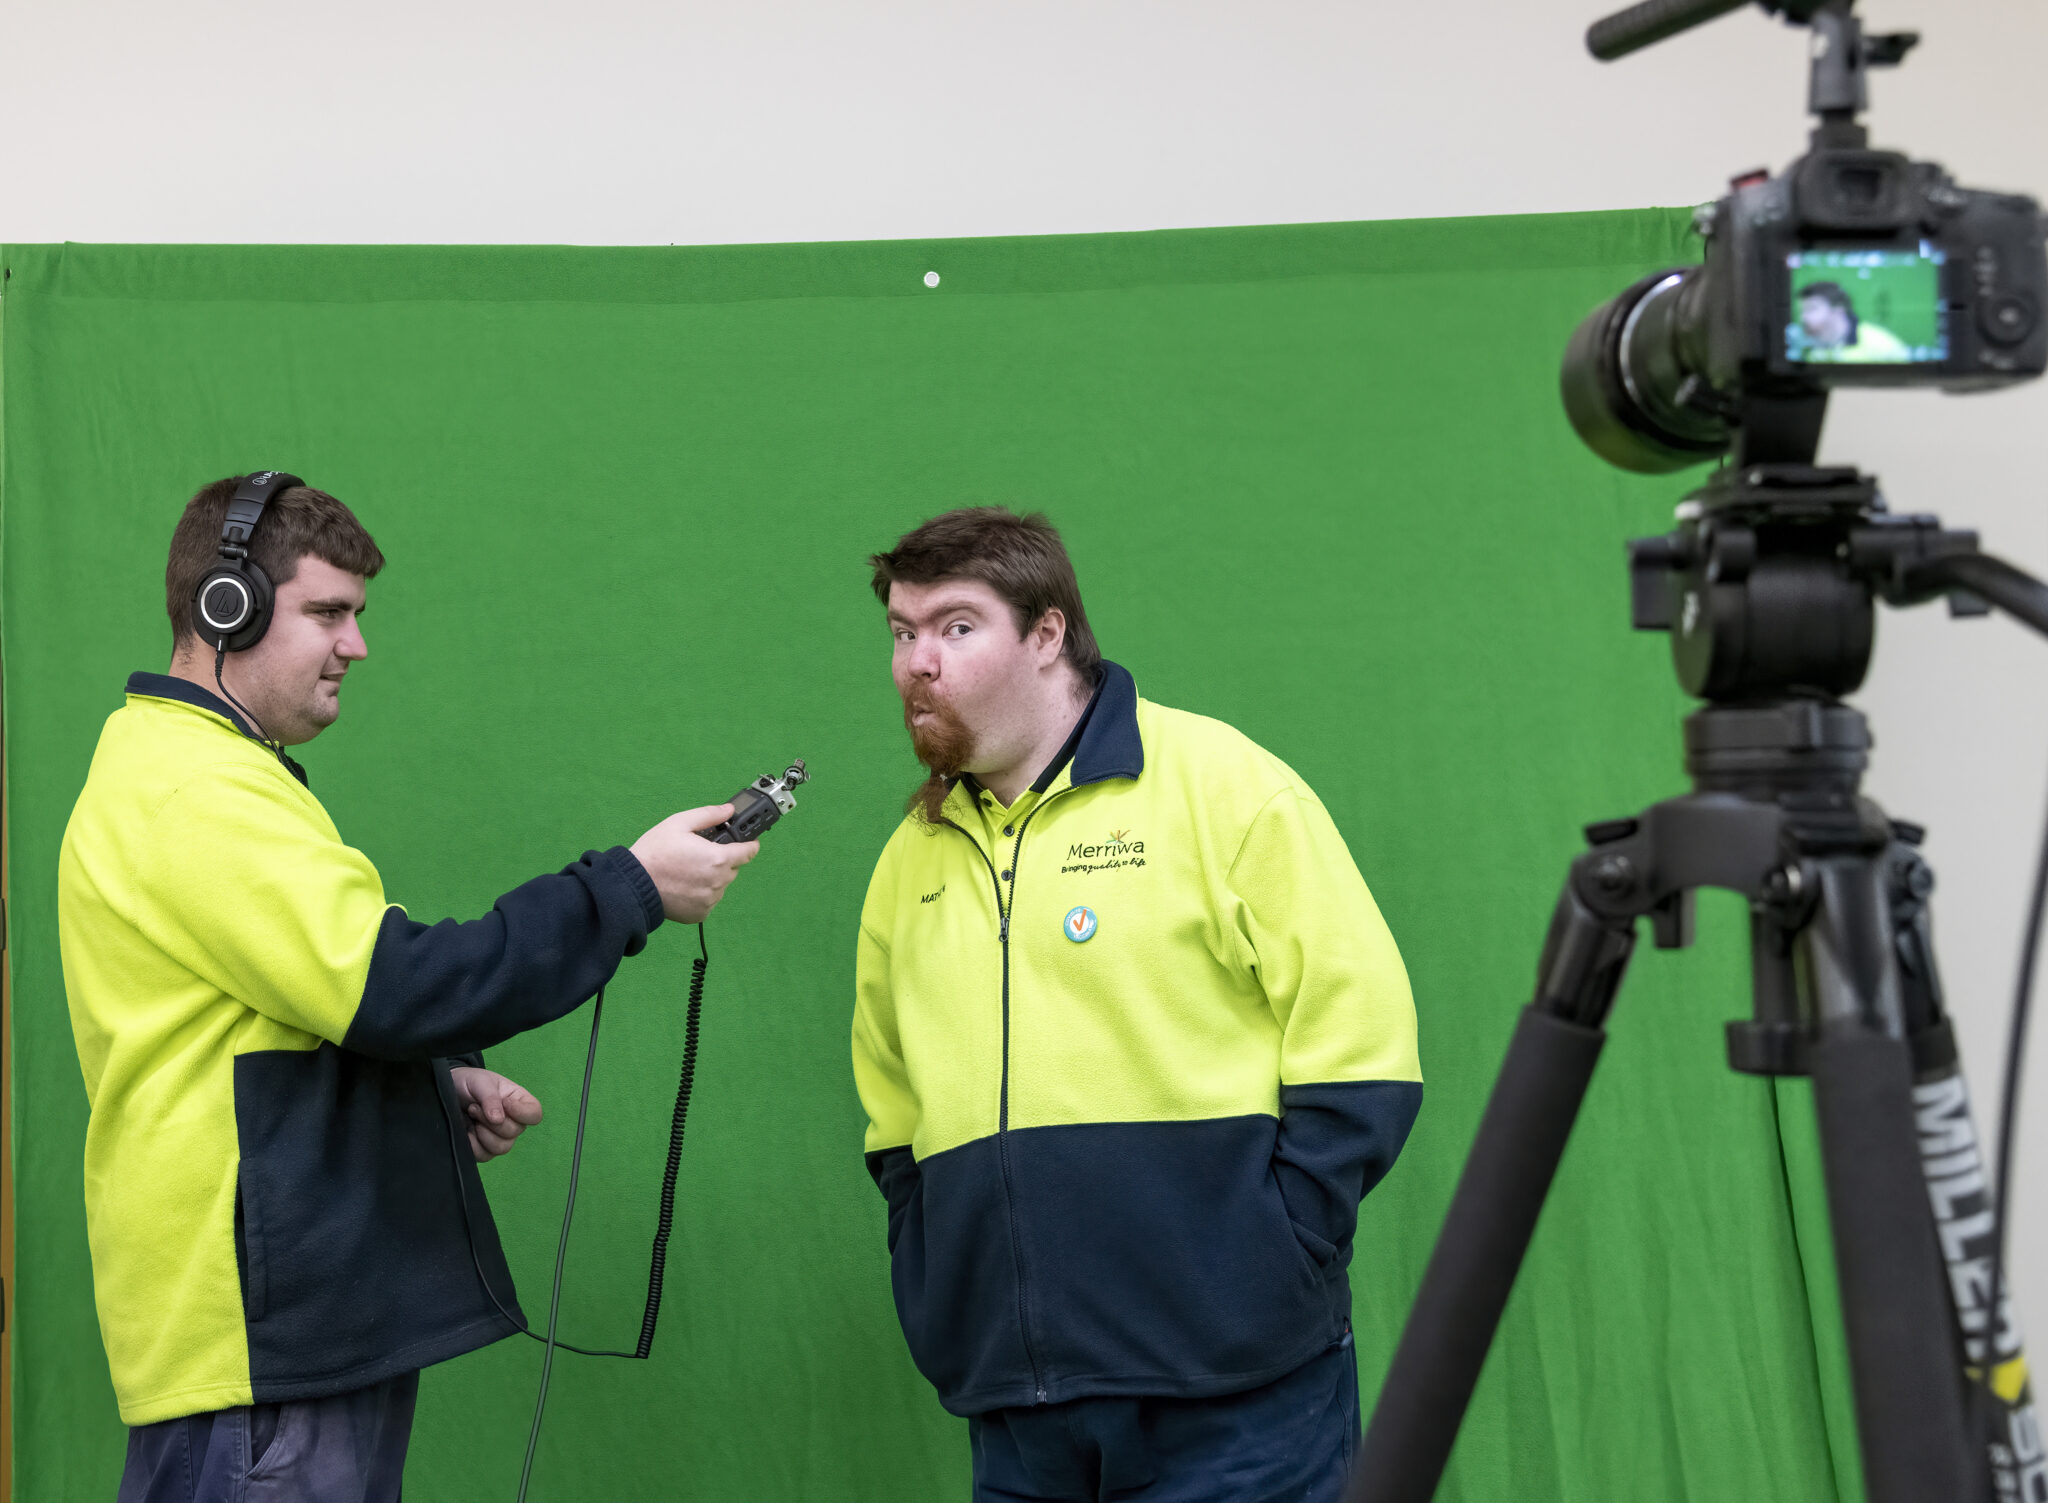 Recording a video to create safety videos for Merriwa